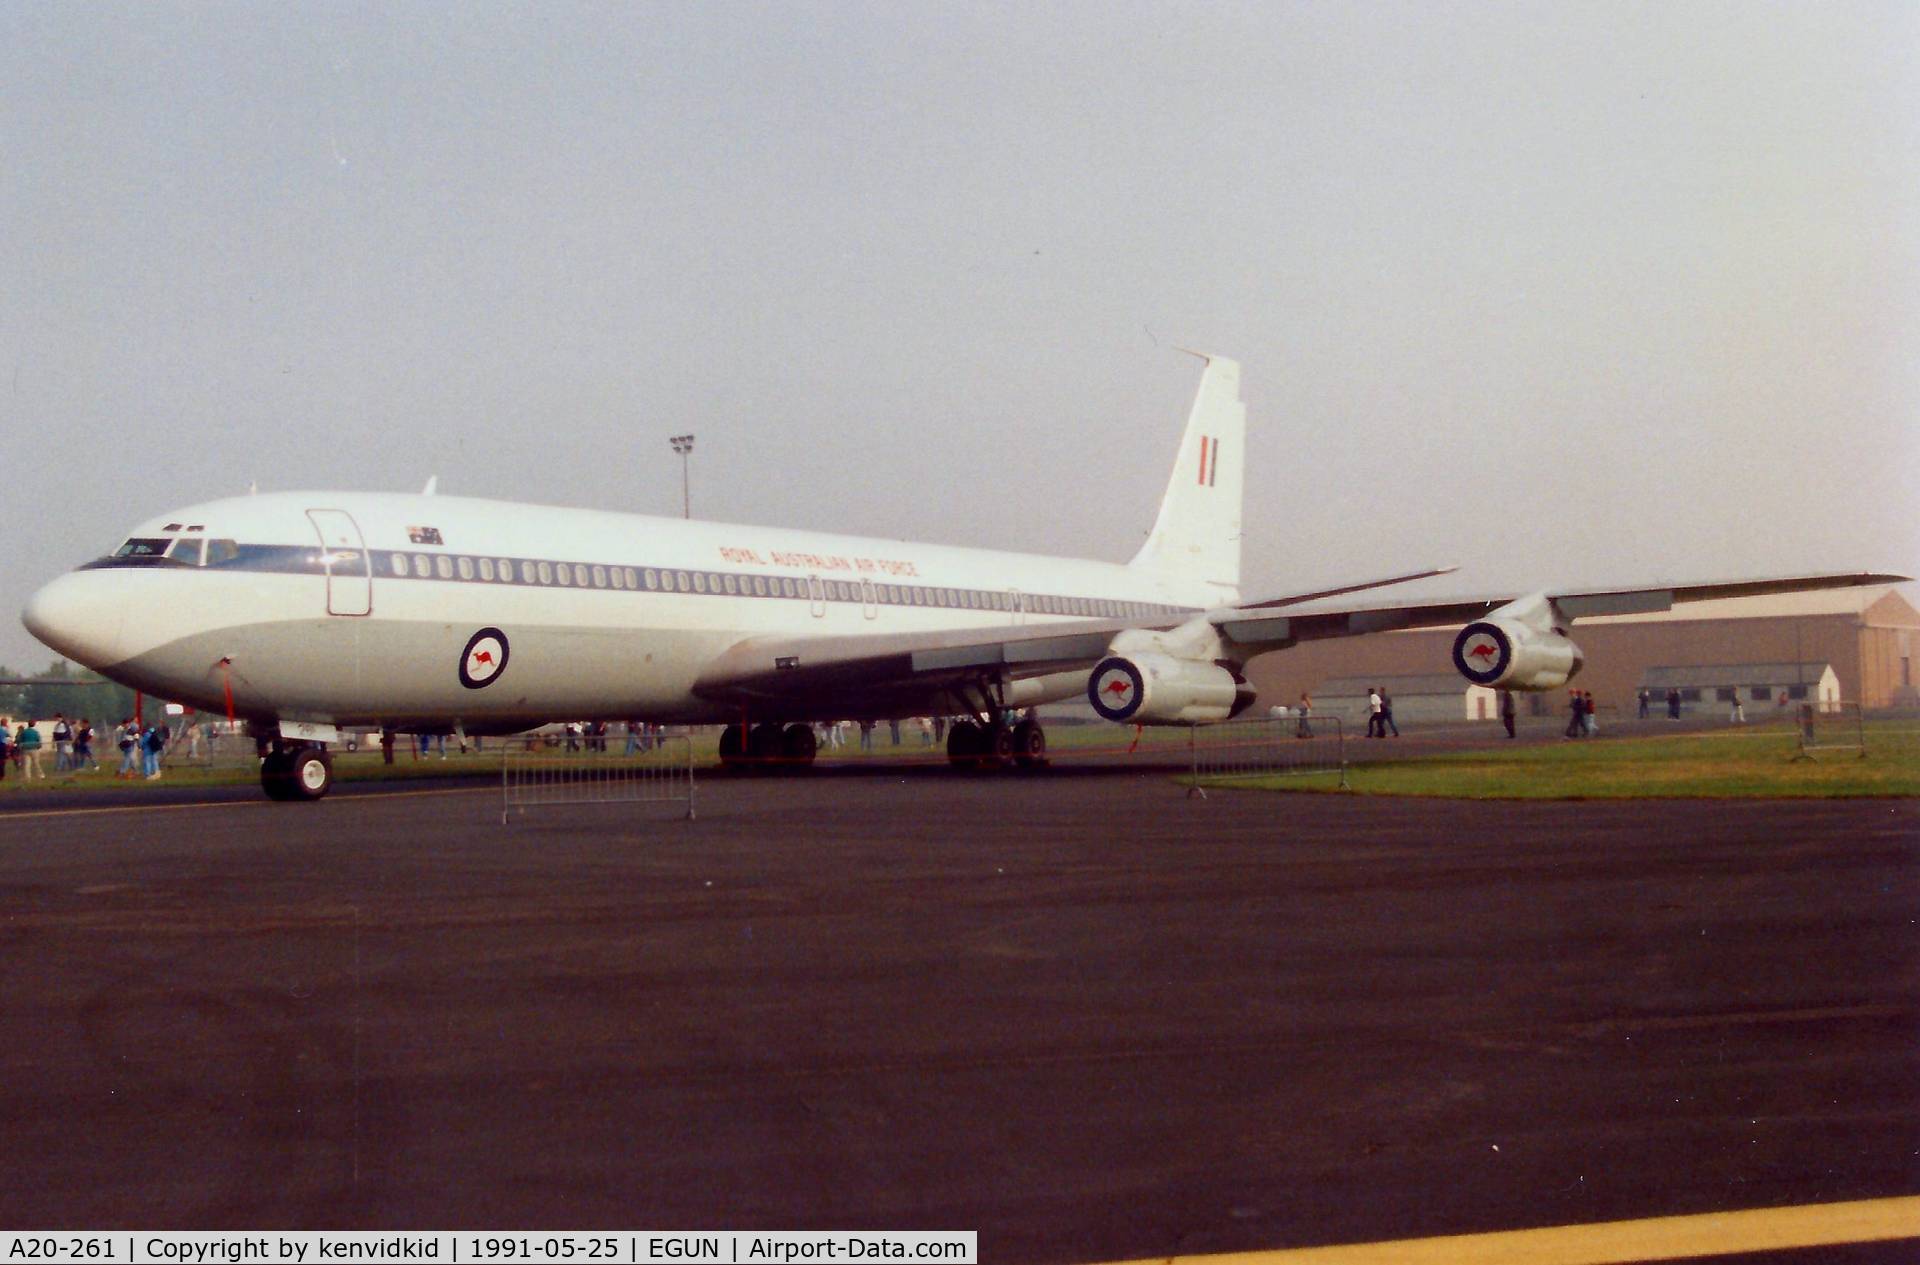 A20-261, 1976 Boeing 707-368C C/N 21261, At the 1991 Mildenhall Air Fete. Scanned from print.